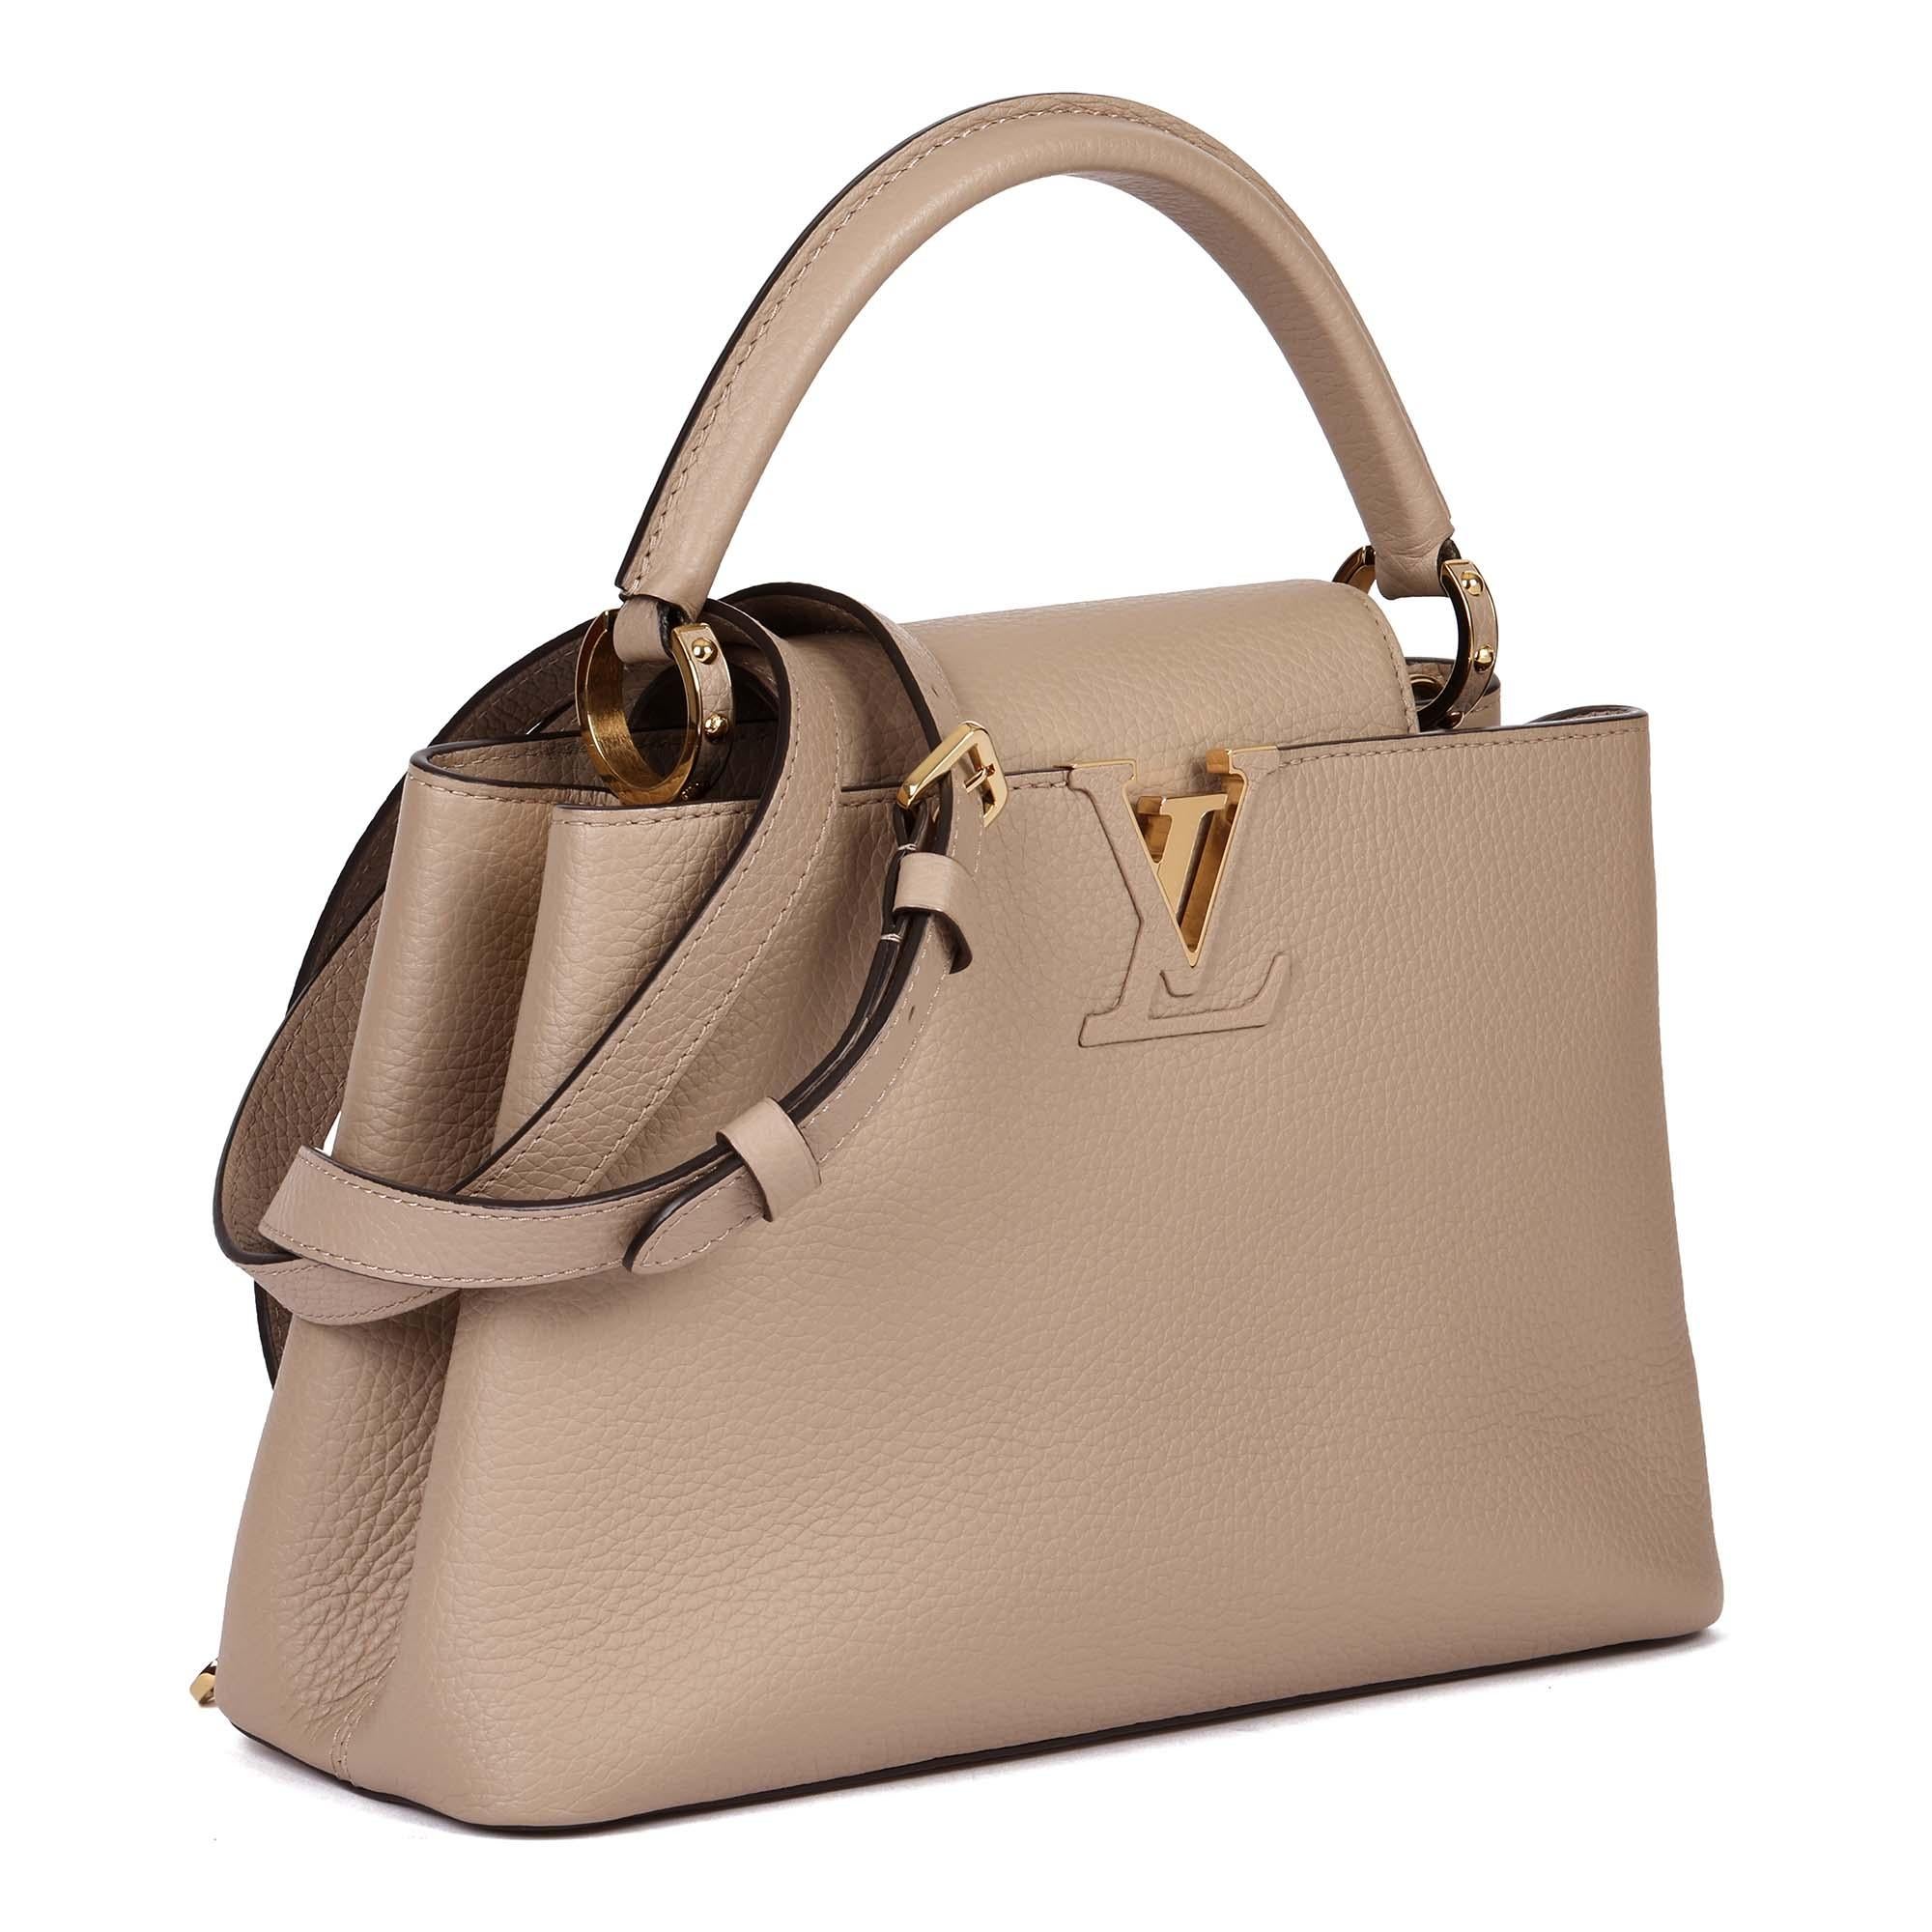 LOUIS VUITTON
Galet Taurillon Leather Capucines MM

Xupes Reference: HB4845
Serial Number: AR1169
Age (Circa): 2019
Accompanied By: Louis Vuitton Dust Bag, Shoulder Strap
Authenticity Details: Date Stamp (Made in France)
Gender: Ladies
Type: Top